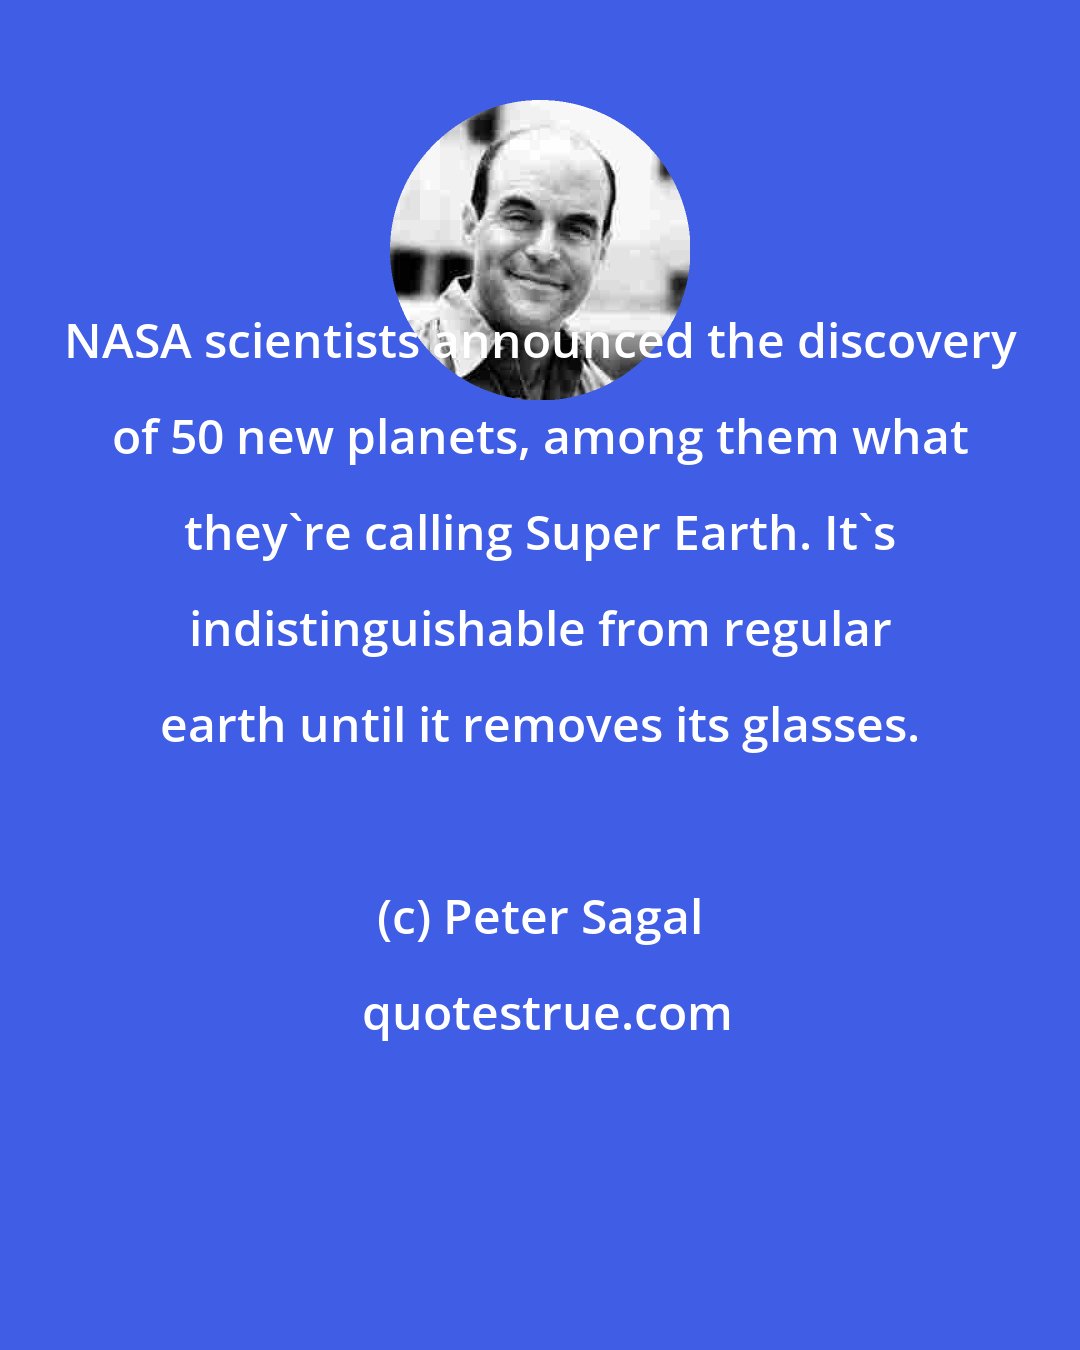 Peter Sagal: NASA scientists announced the discovery of 50 new planets, among them what they're calling Super Earth. It's indistinguishable from regular earth until it removes its glasses.